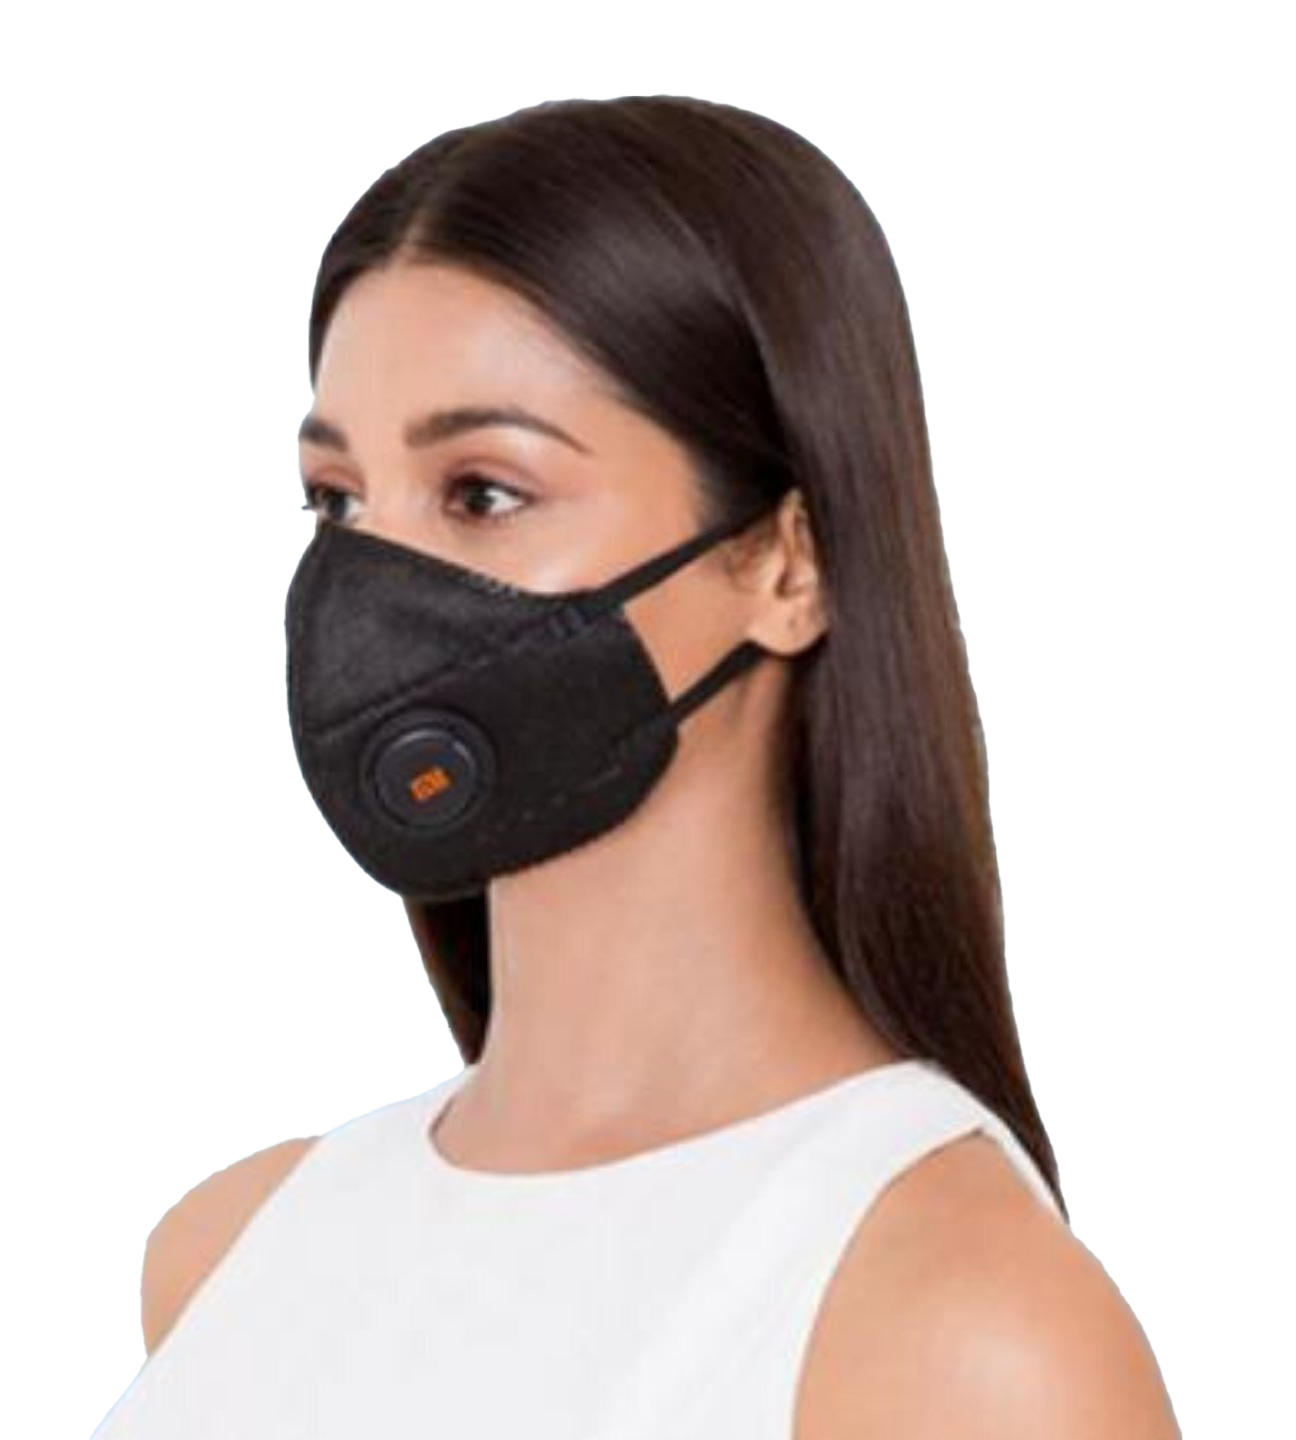 Face Mask Anti-Pollution Free HQ Image PNG Image